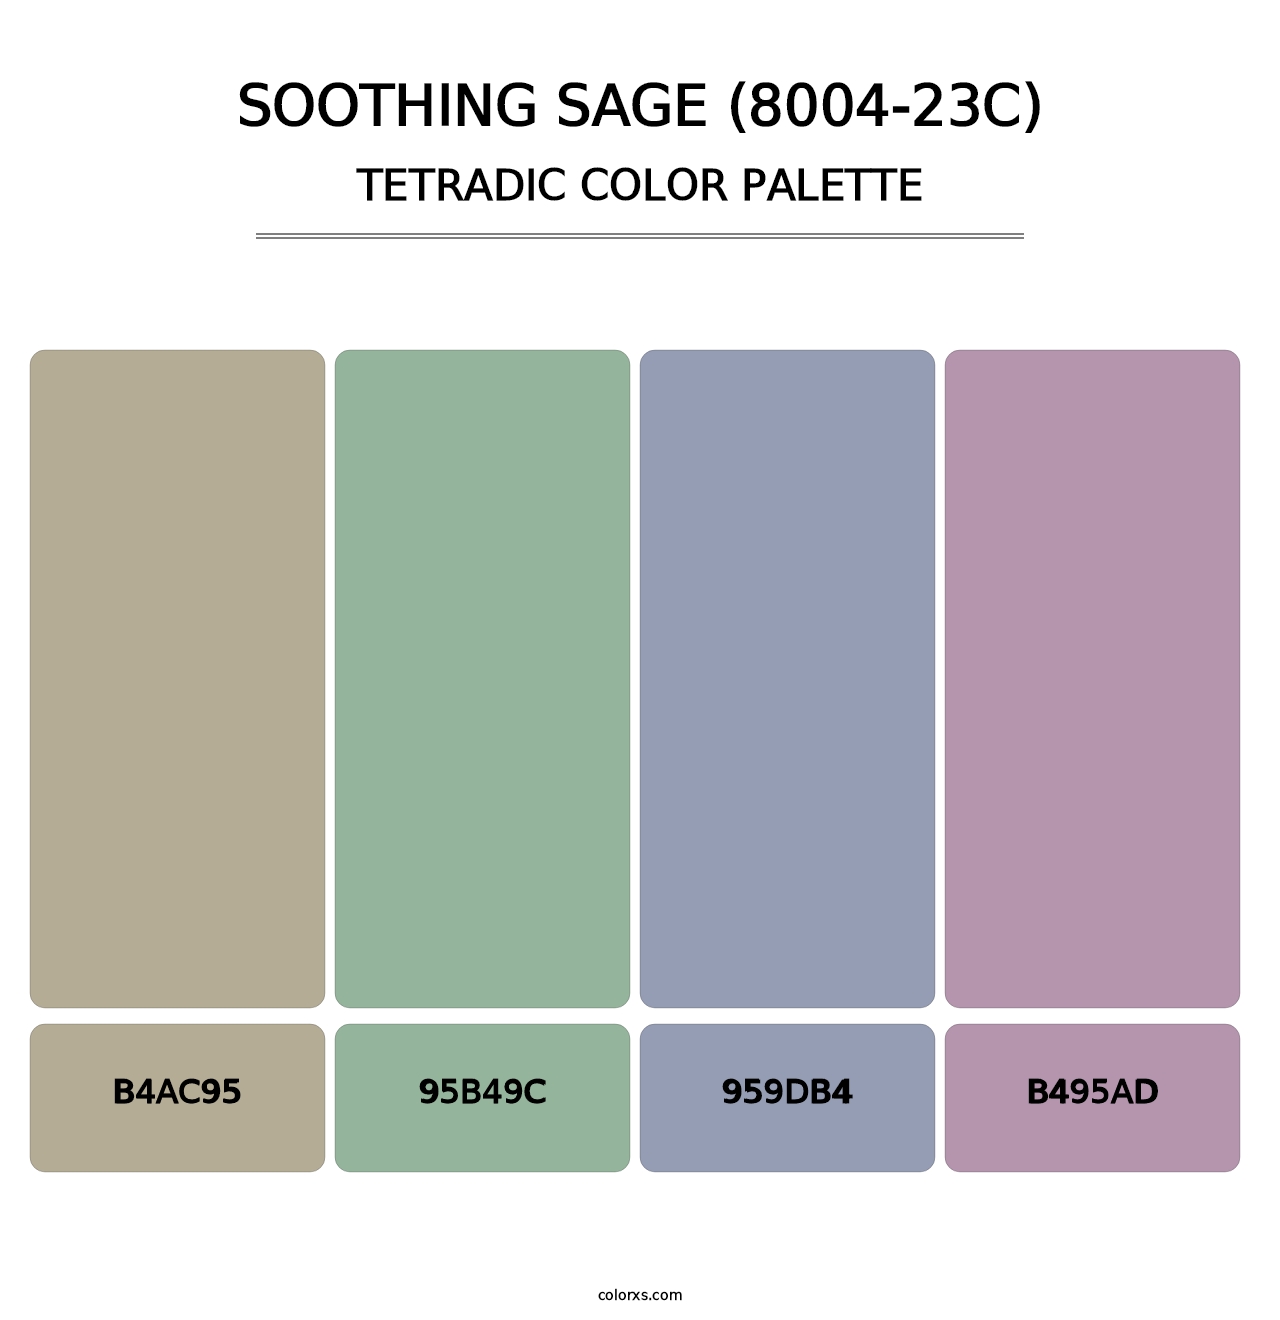 Soothing Sage (8004-23C) - Tetradic Color Palette